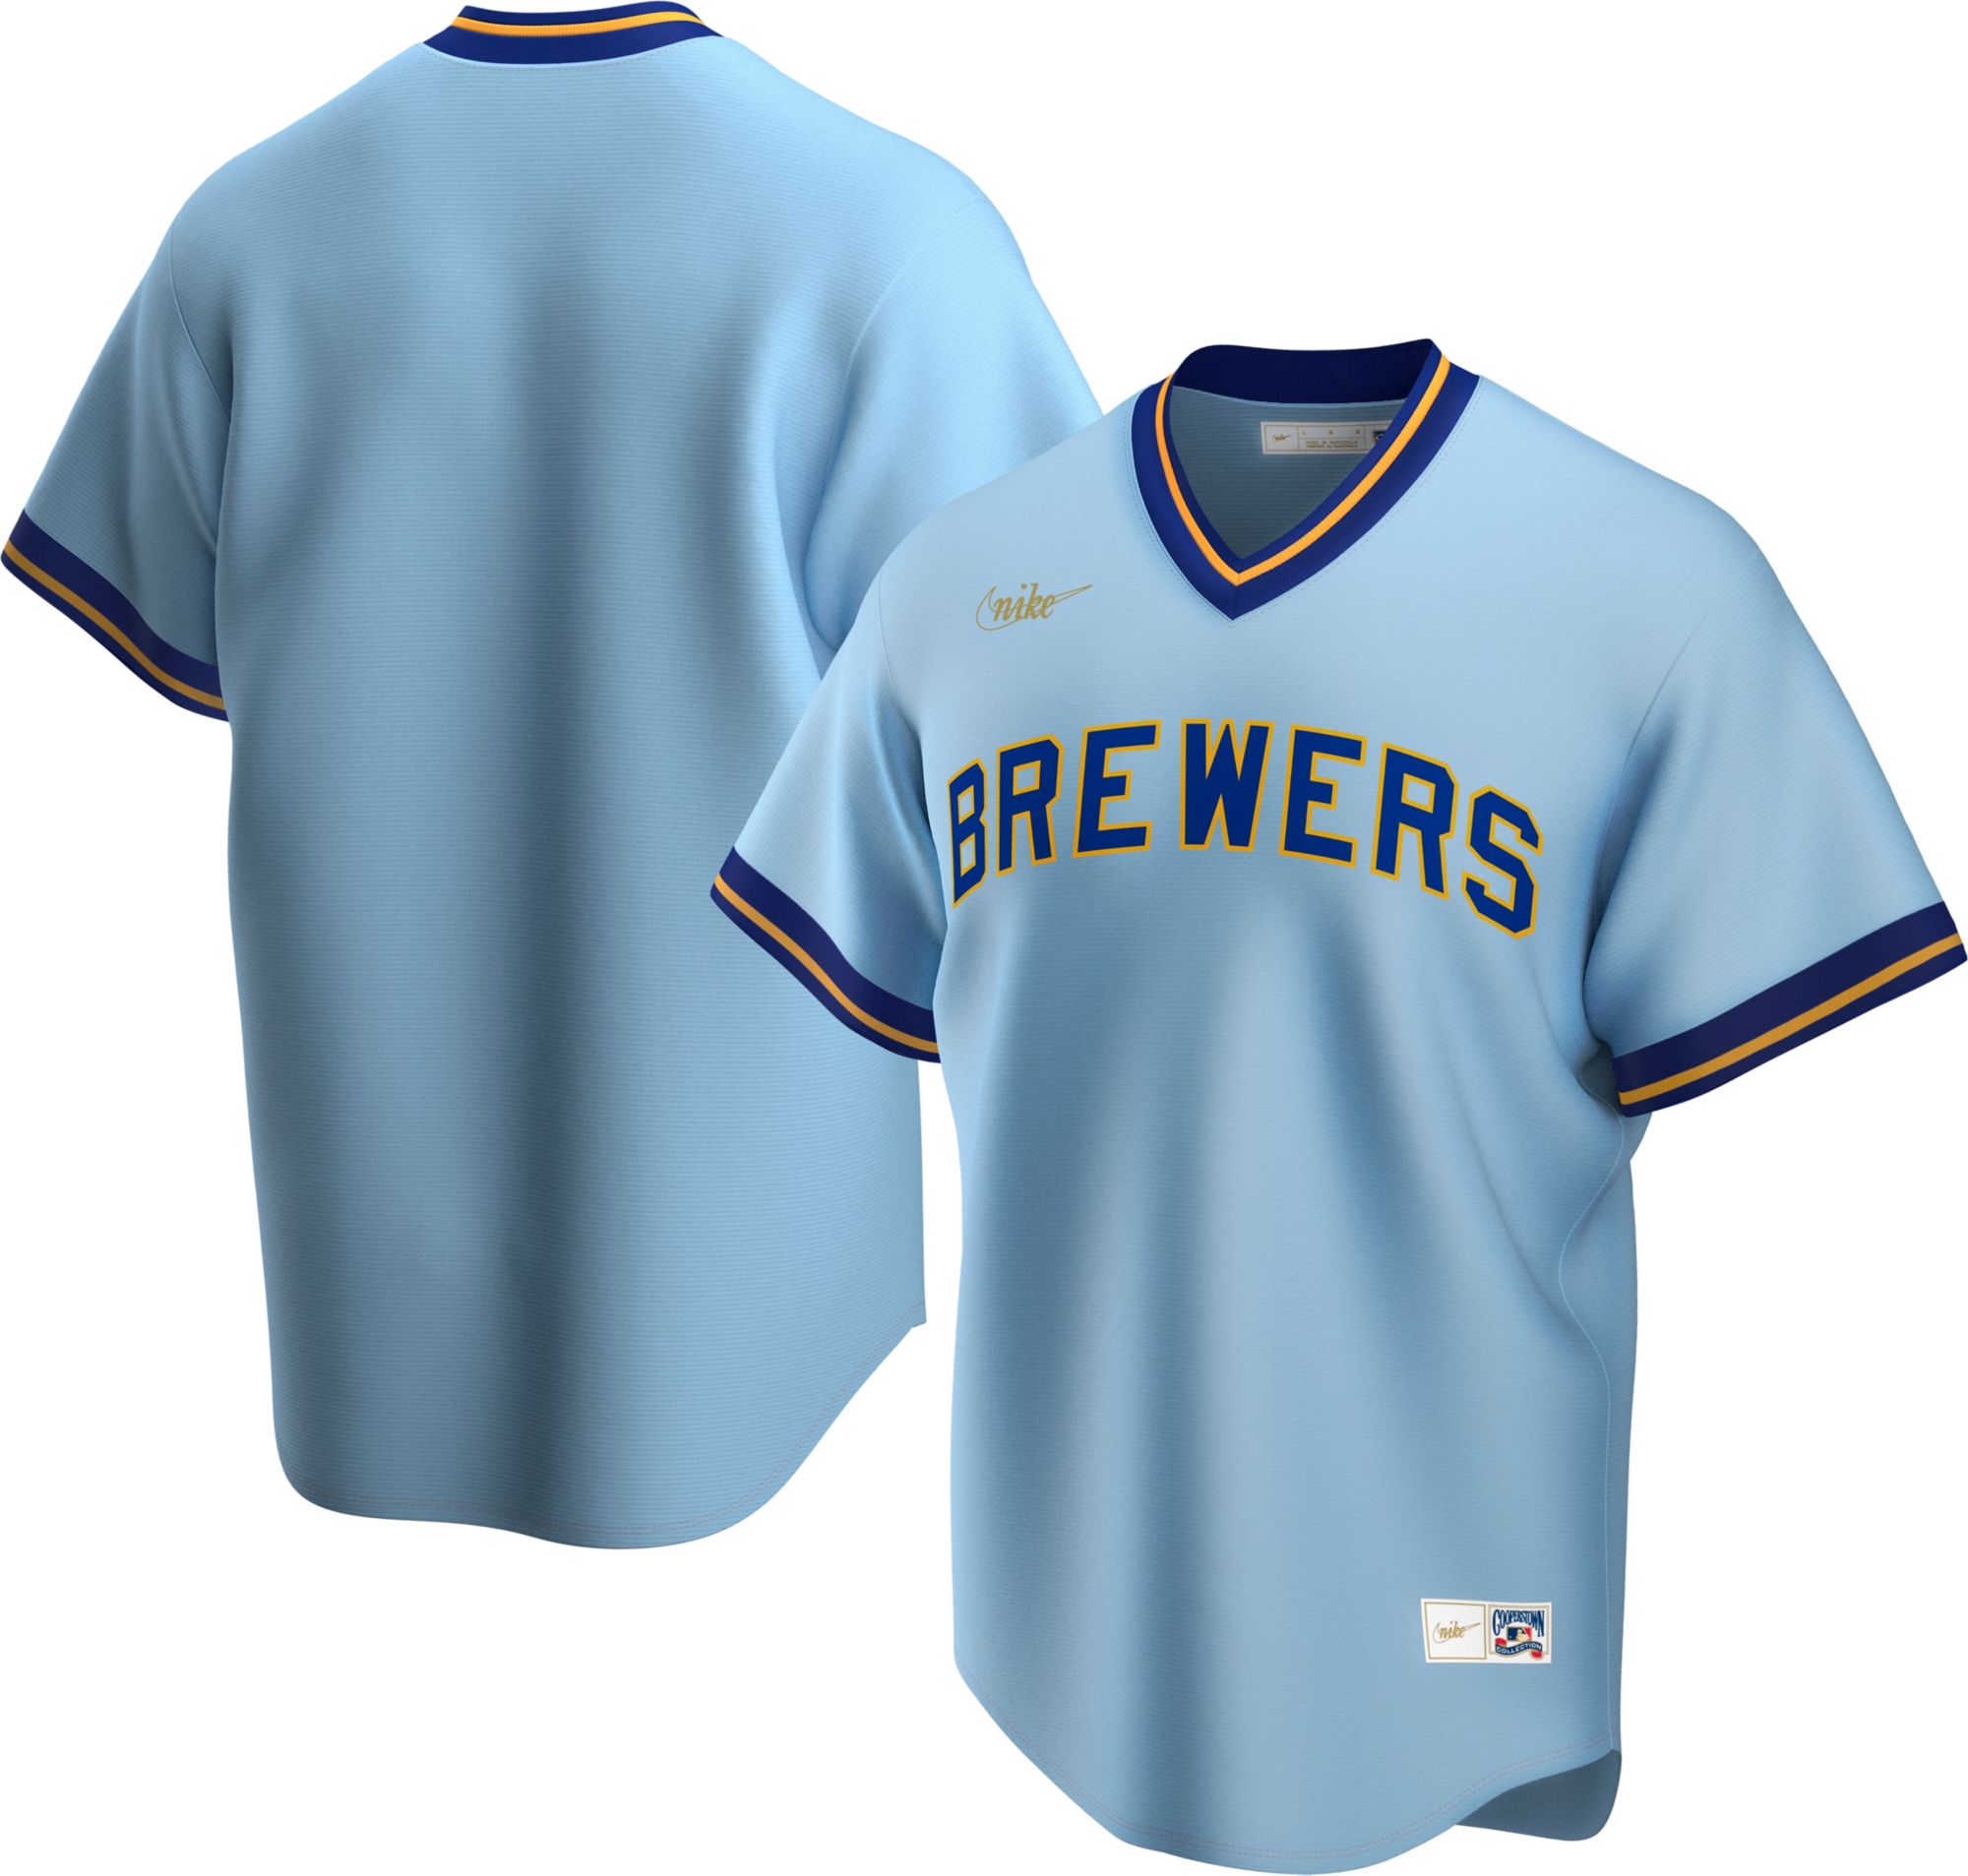 Nike Men's Milwaukee Brewers Willy Adames #27 Cream Cool Base Jersey